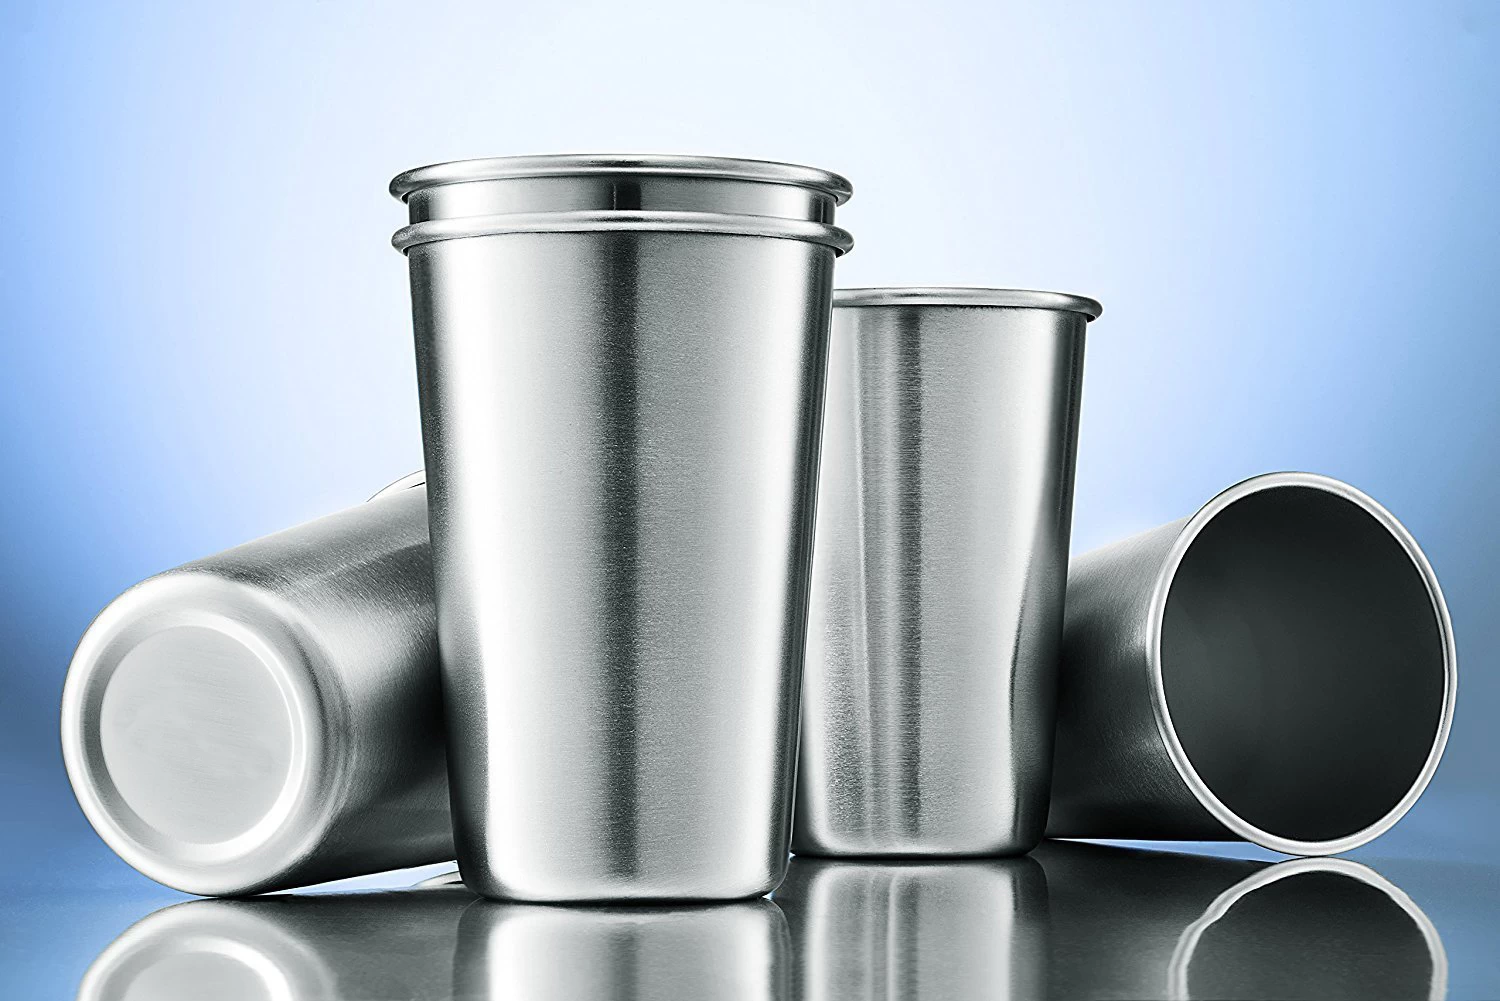 Stainless Steel Milk Cup manufacturer china, Stainless Steel Milk Cup wholesales china, Stainless Steel Mearsuring Cup supplier china